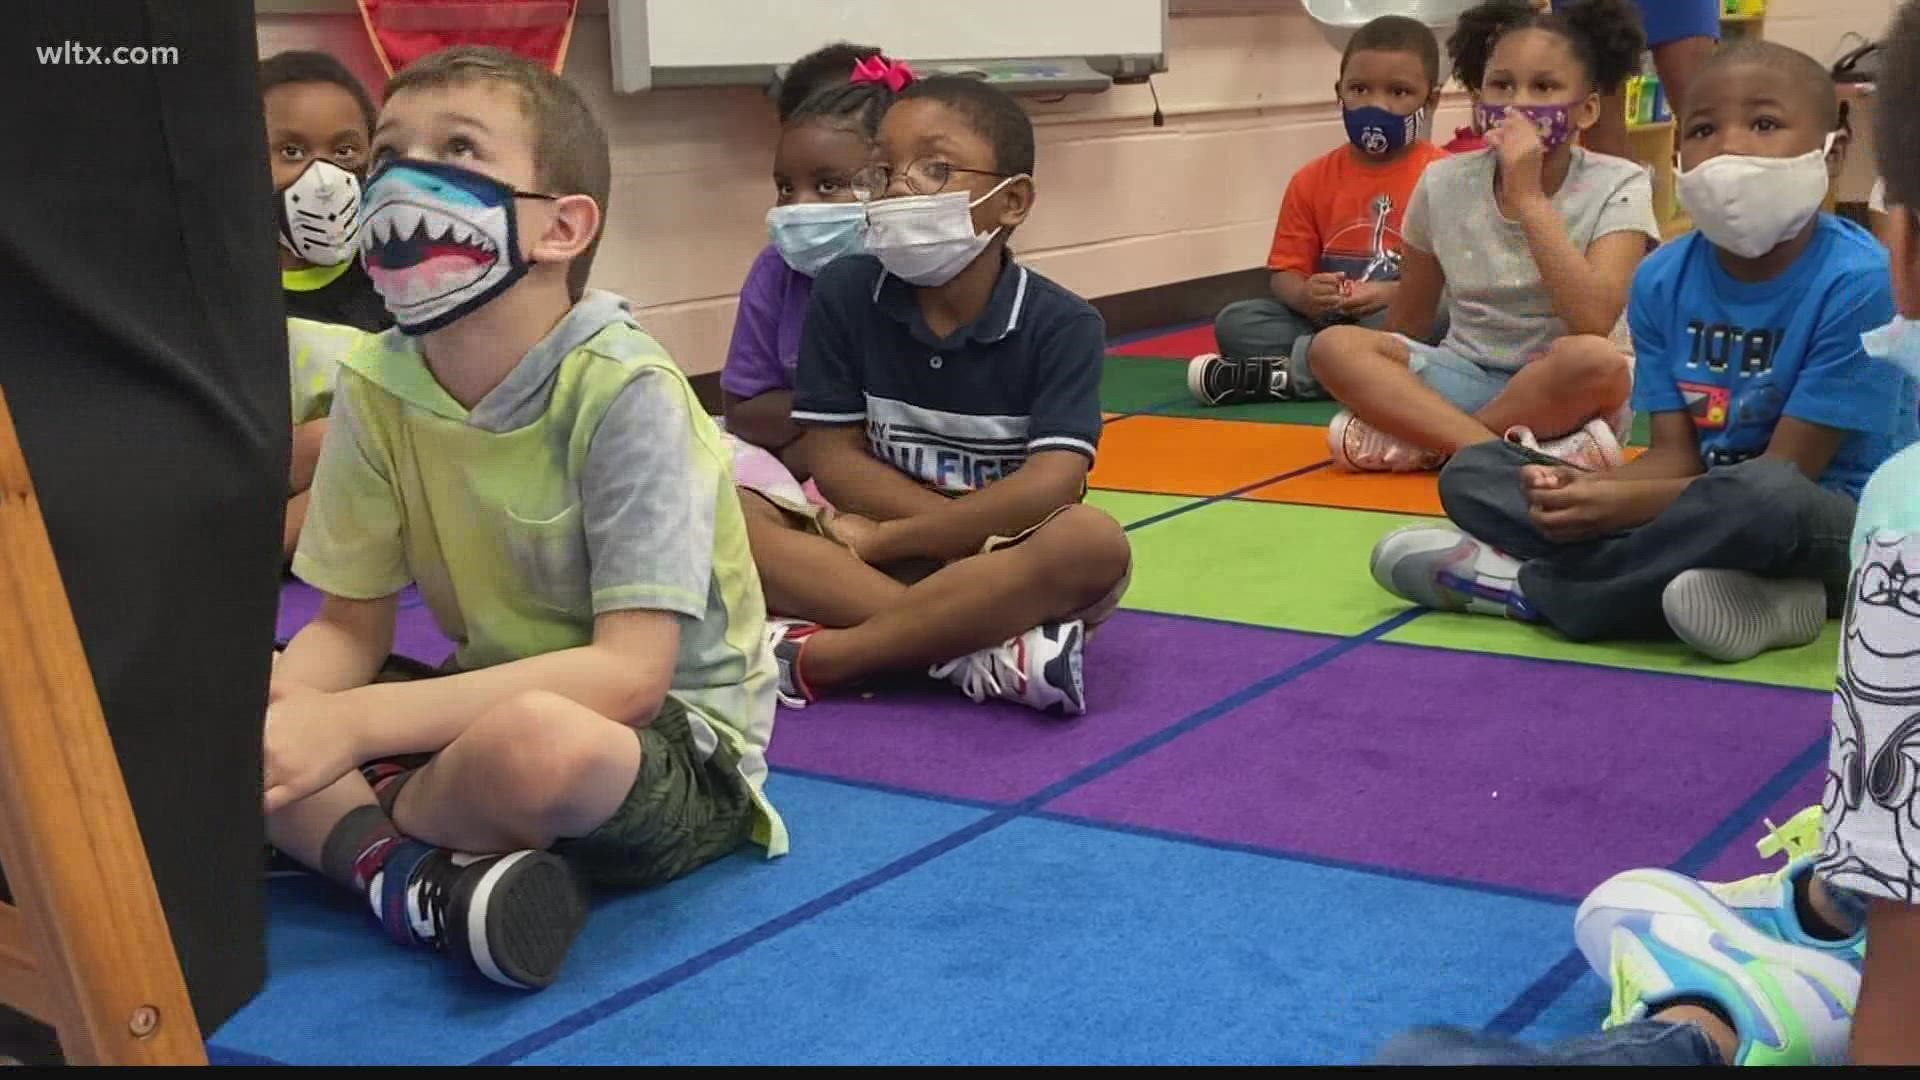 The goal, to return the decision of making of mask   wearing requirements to local school districts.